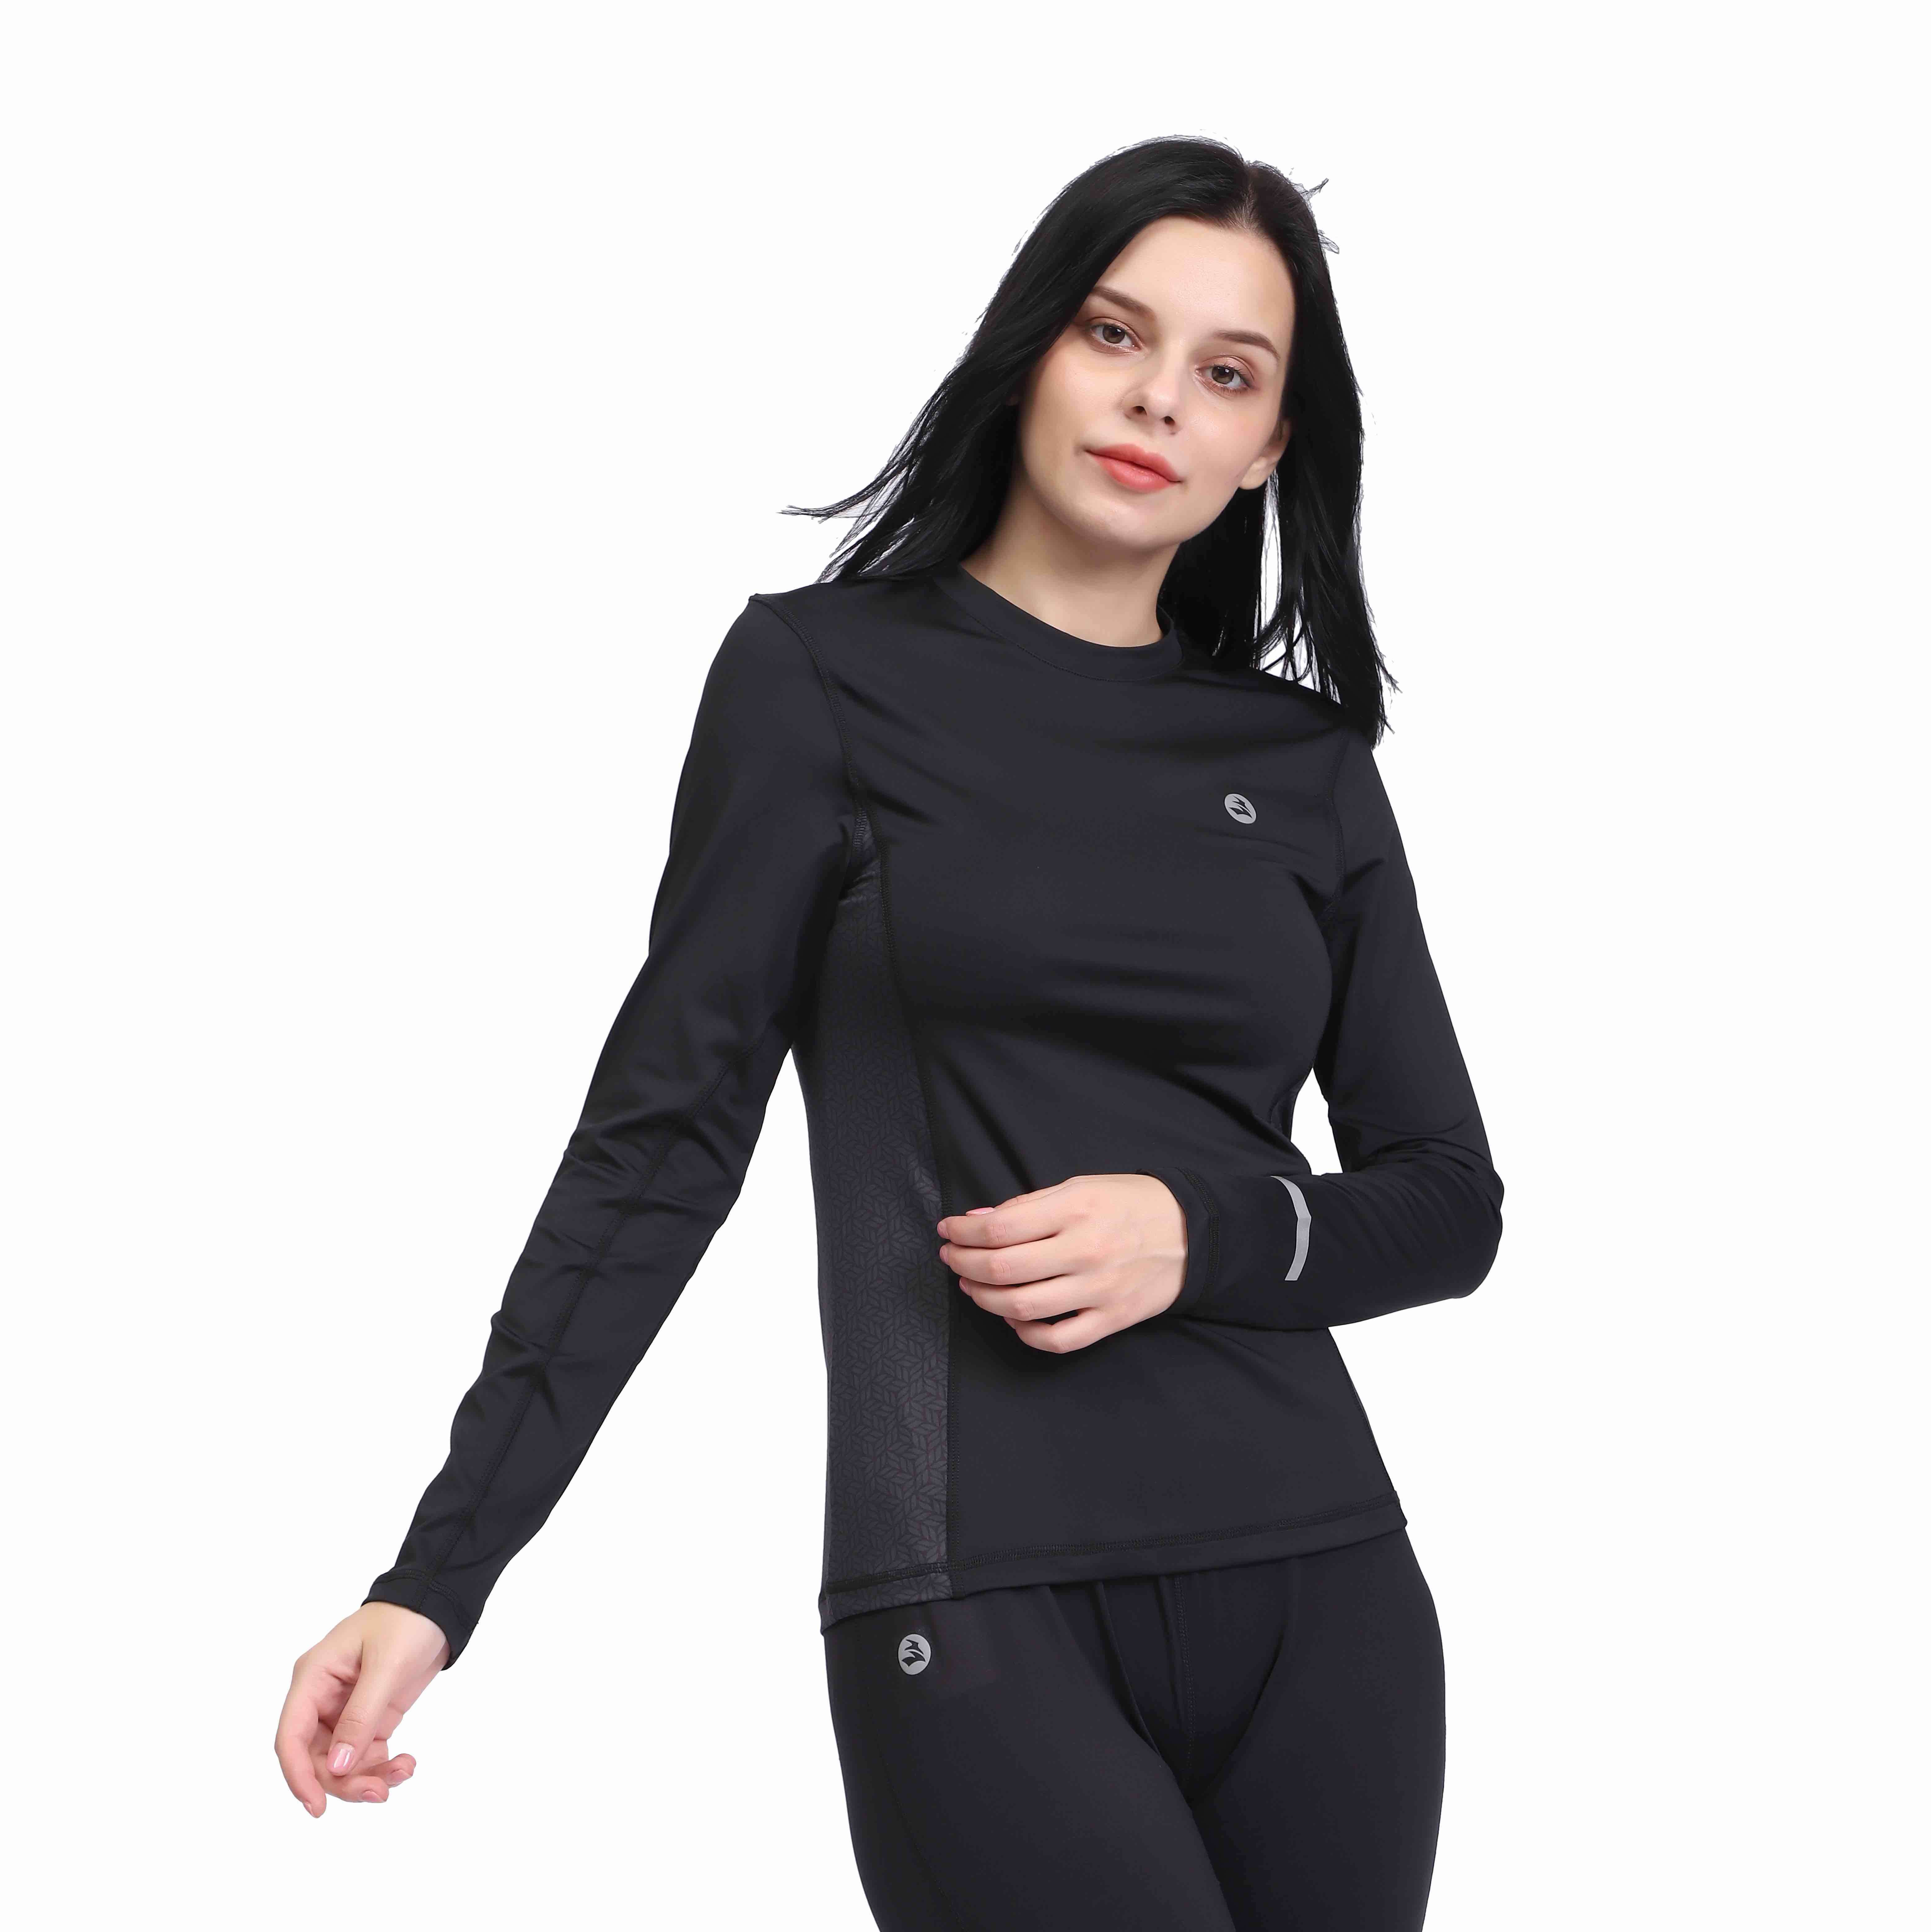 Black Cowl Neck Compression Baselayer Long Sleeve Top for Women